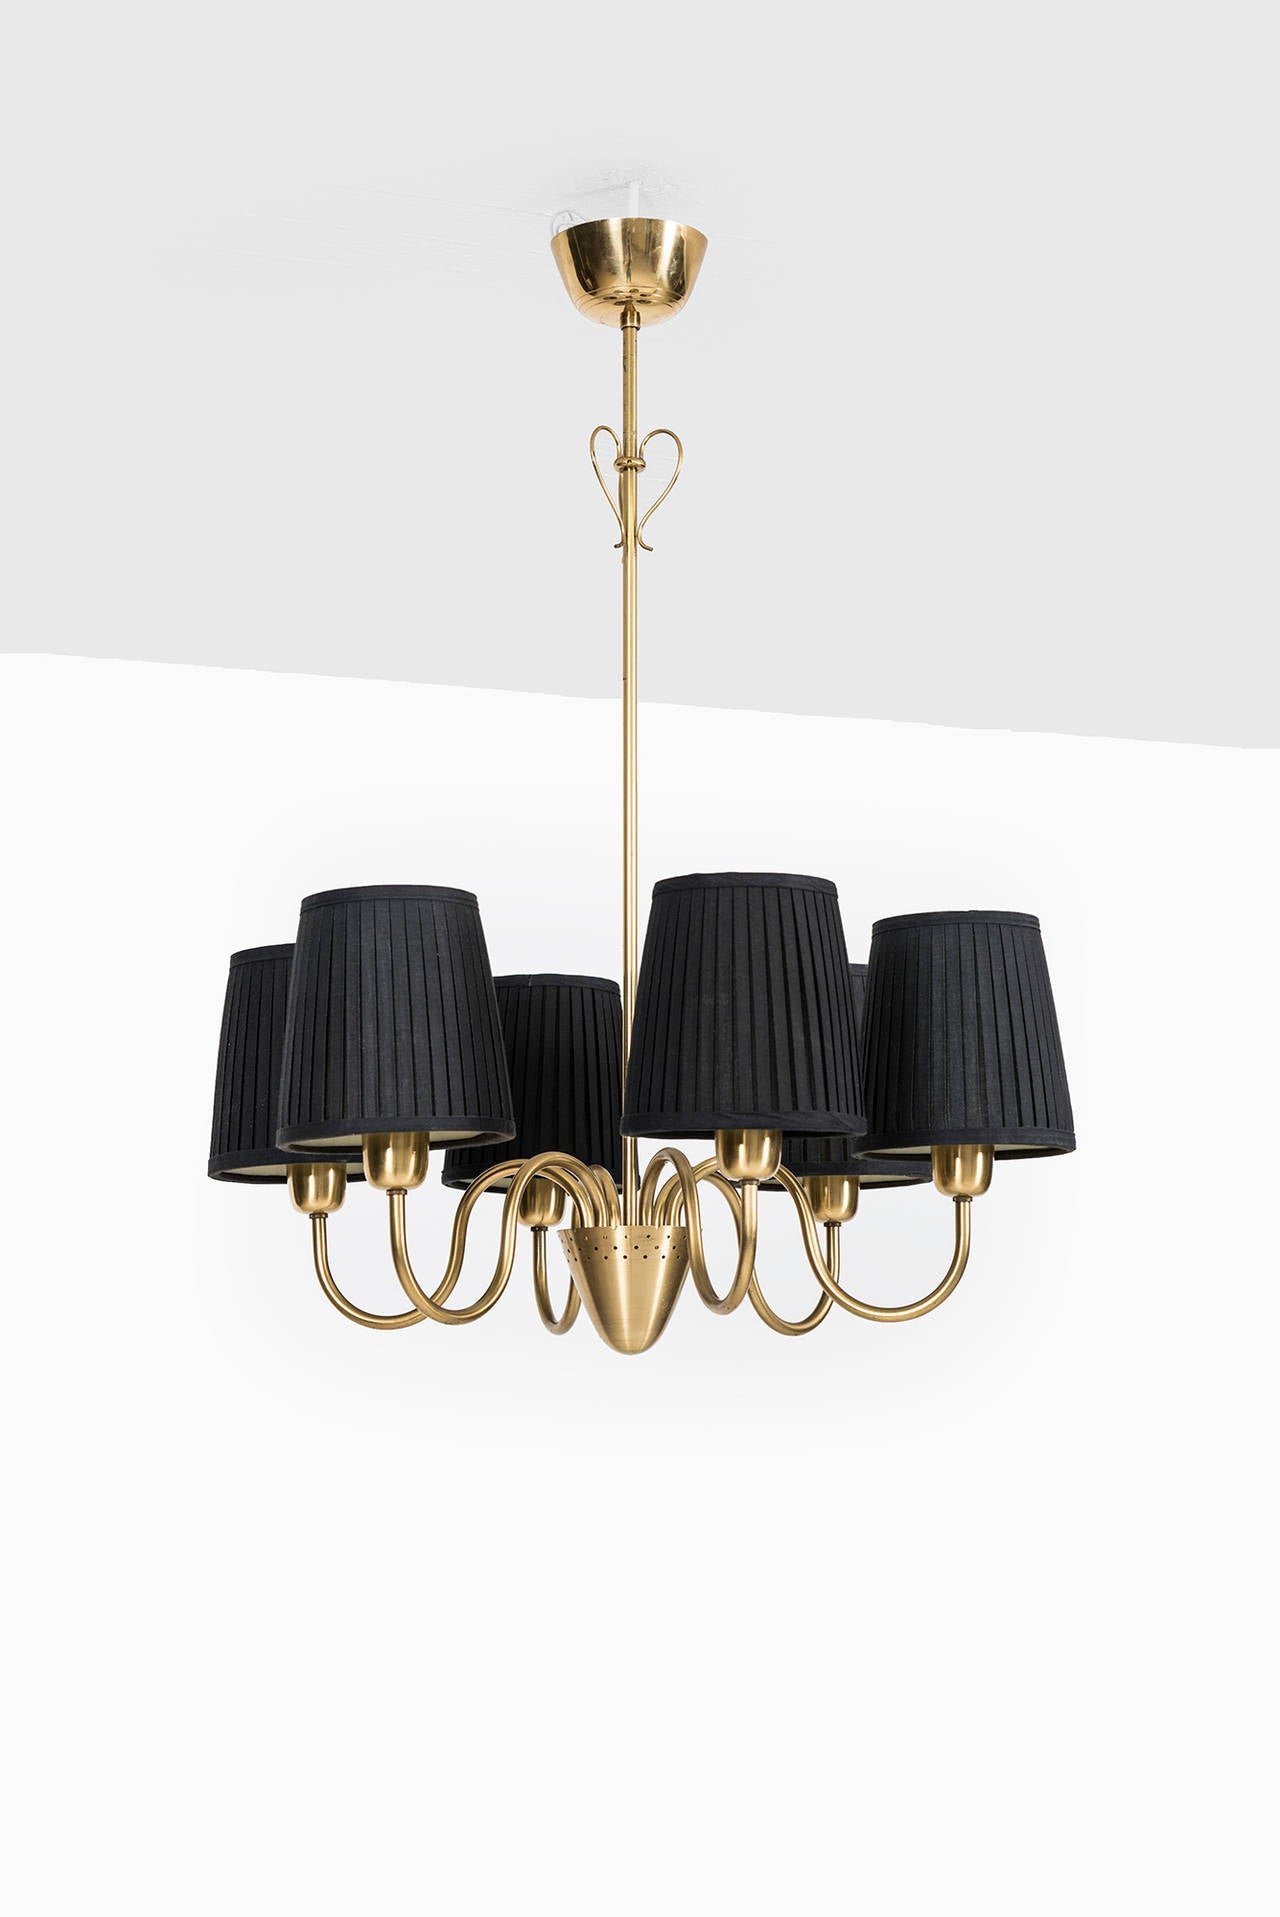 Rare ceiling lamp in brass with black lamp shades designed by Hans Bergström. Produced by Ateljé Lyktan in Åhus, Sweden.